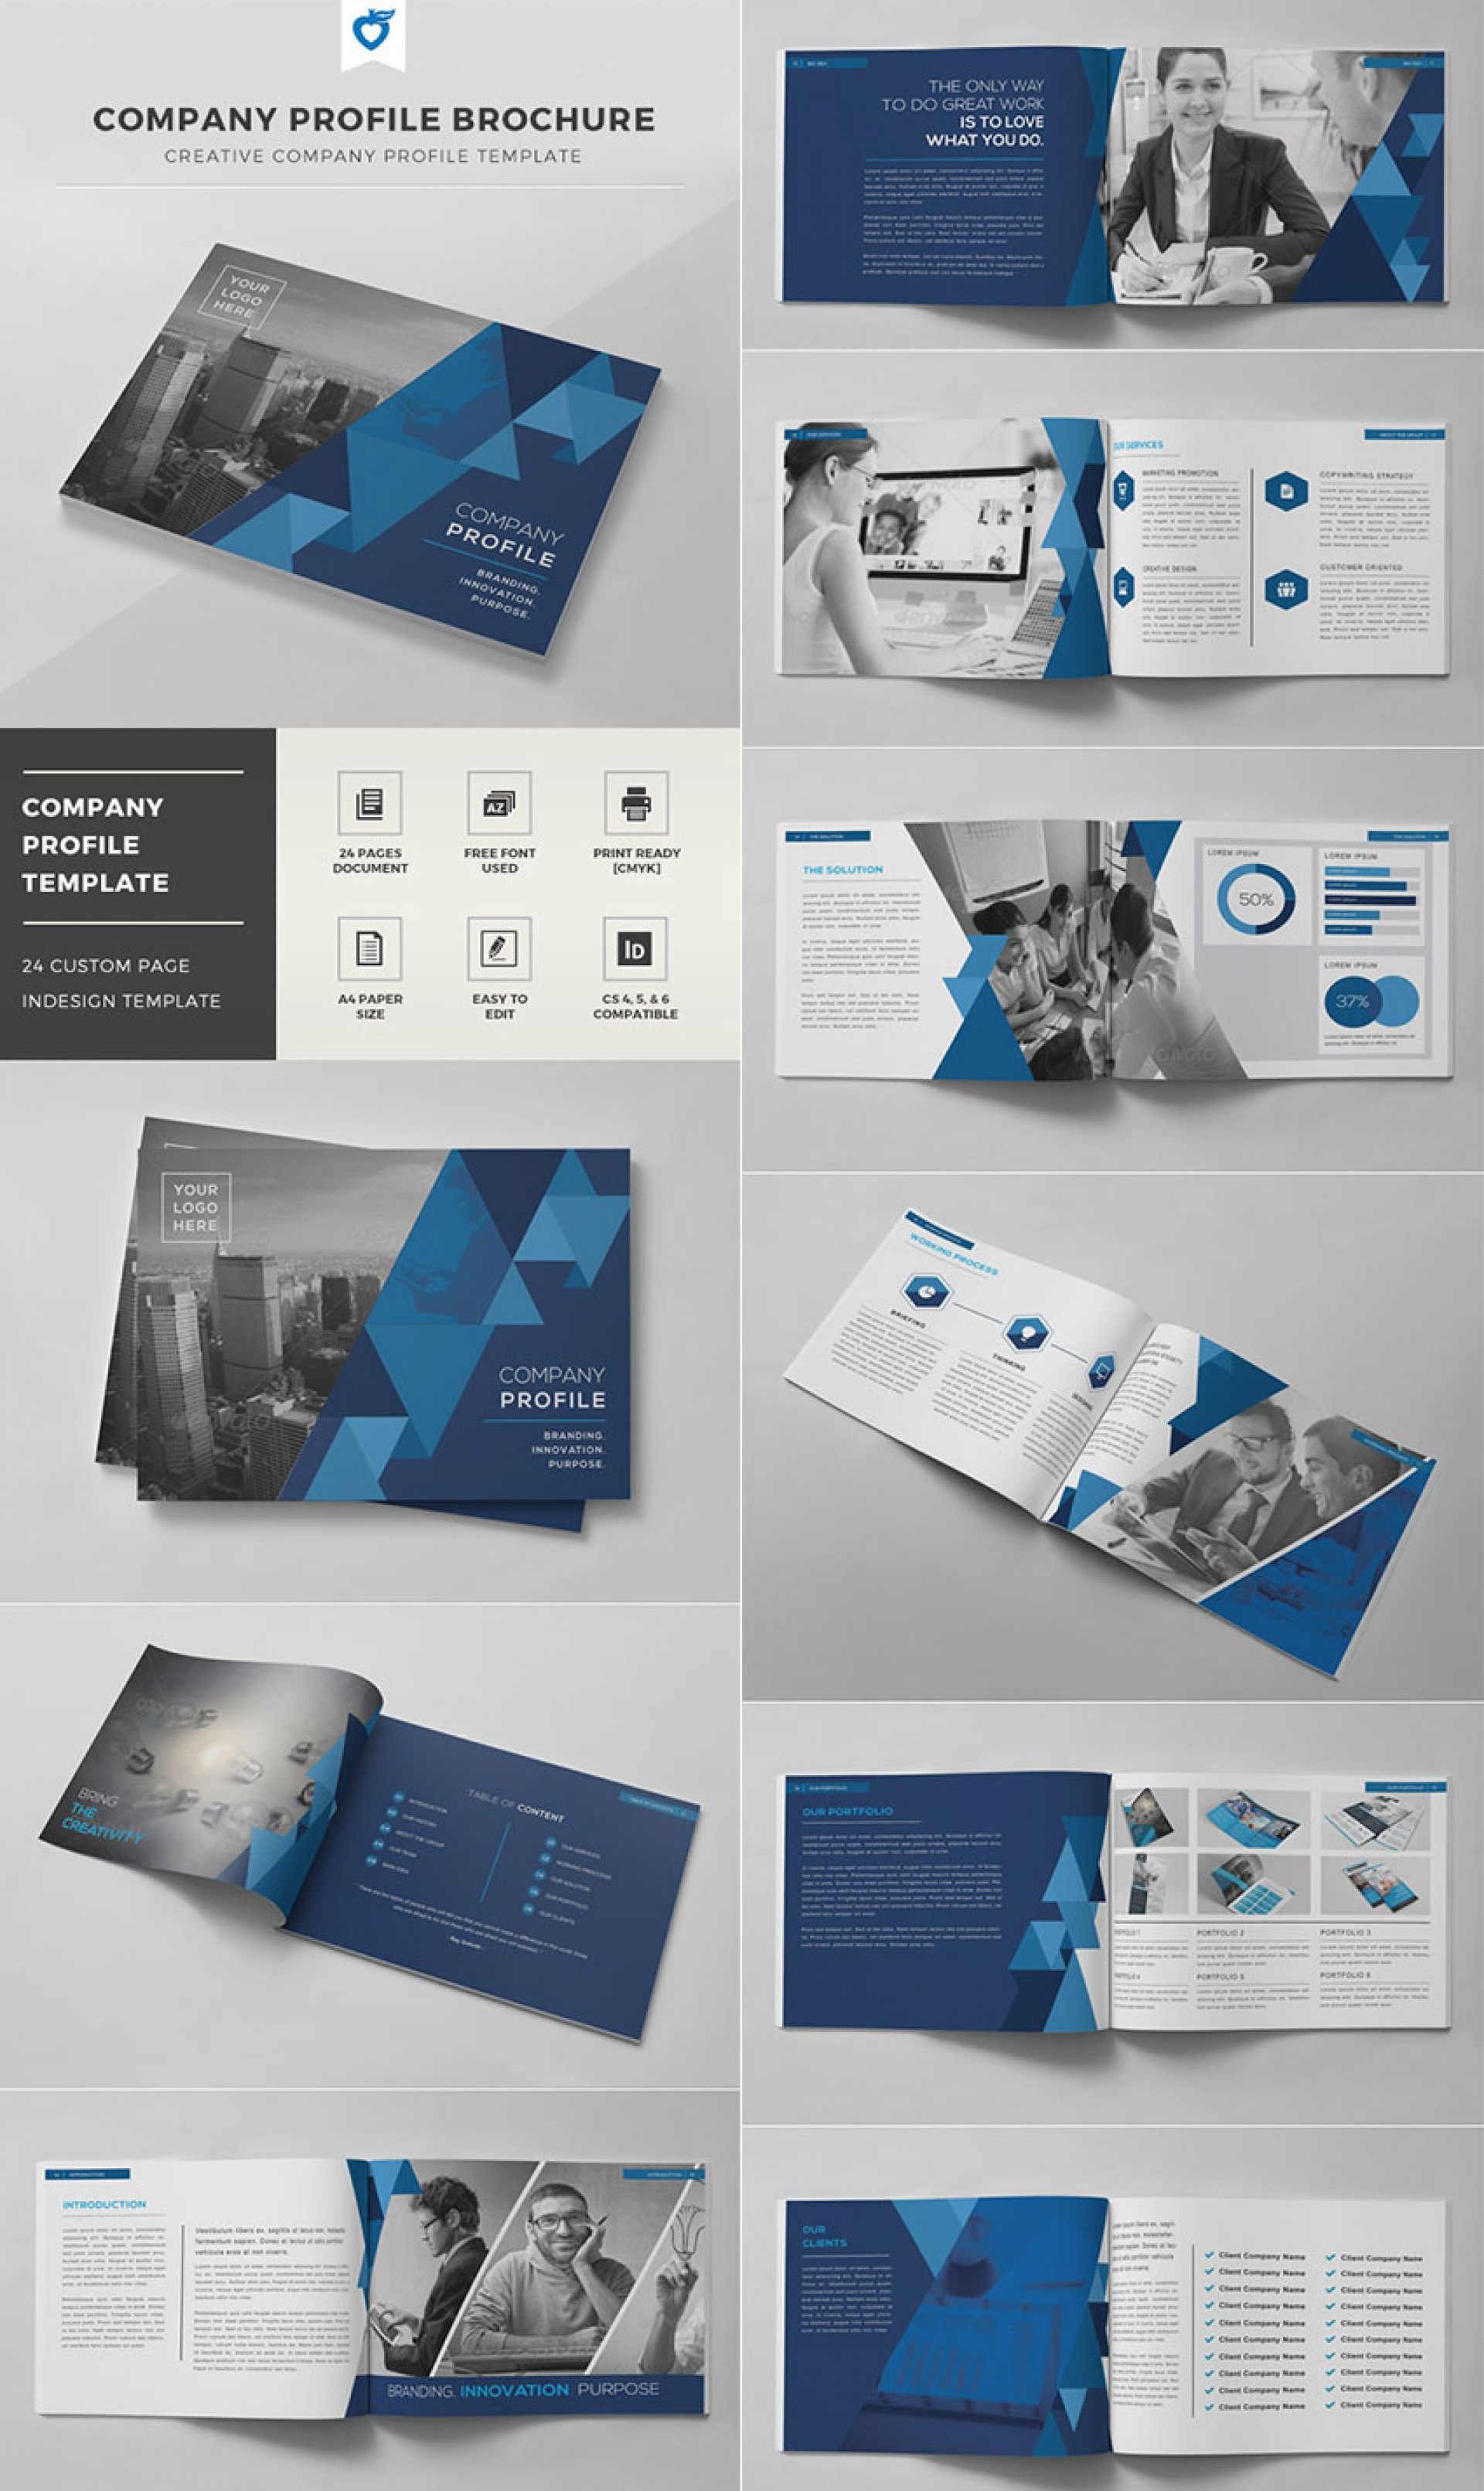 Indesign Template Free Brochure 004 Ideas Templates Company Regarding Brochure Templates Free Download Indesign